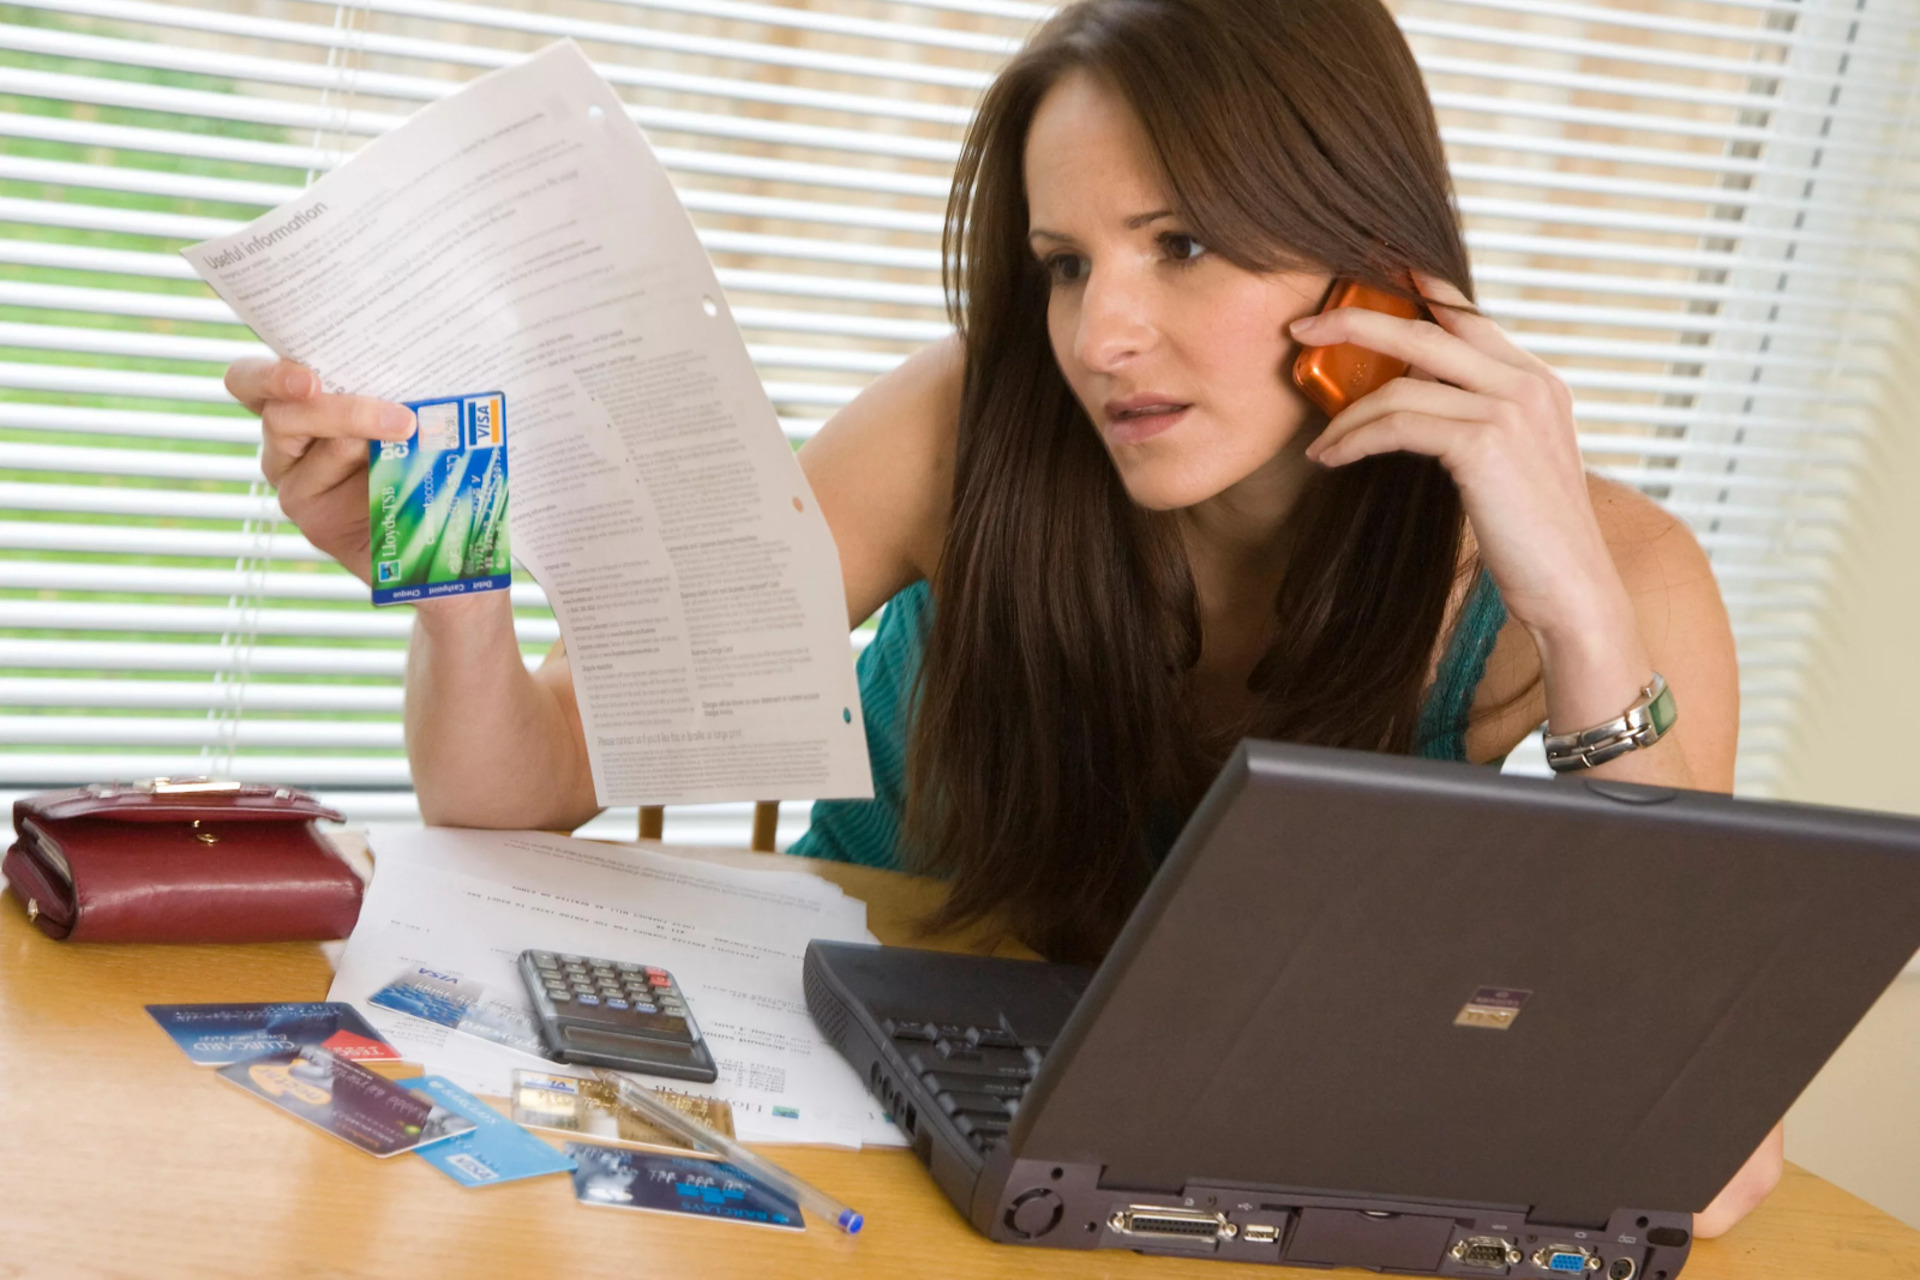 Where to Obtain a Loan with Poor Credit History